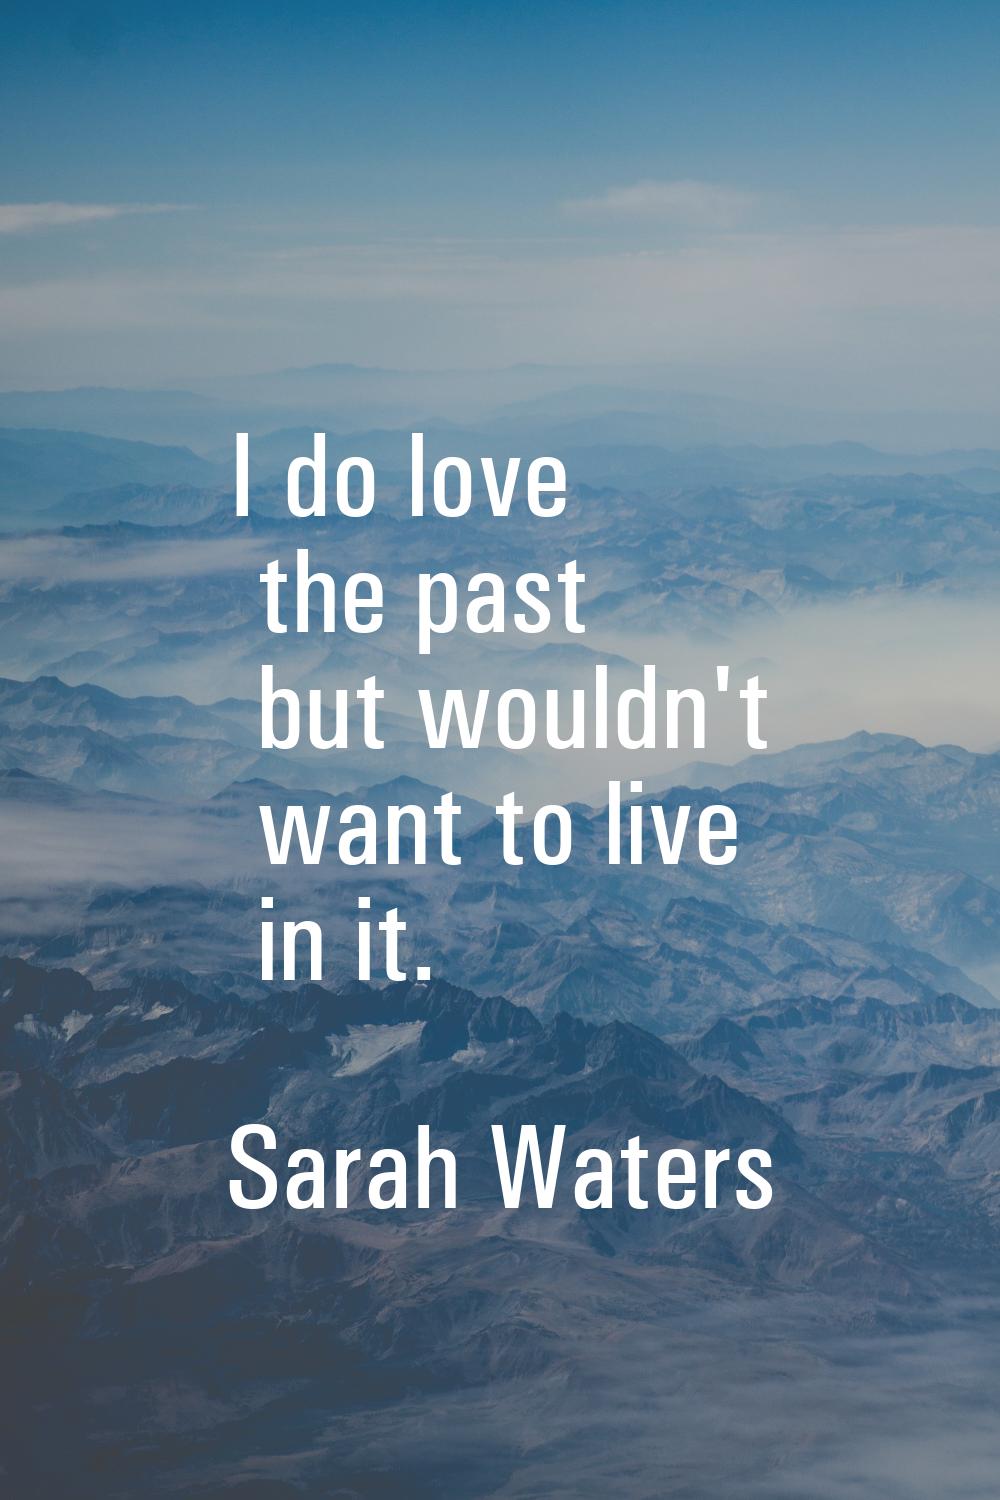 I do love the past but wouldn't want to live in it.